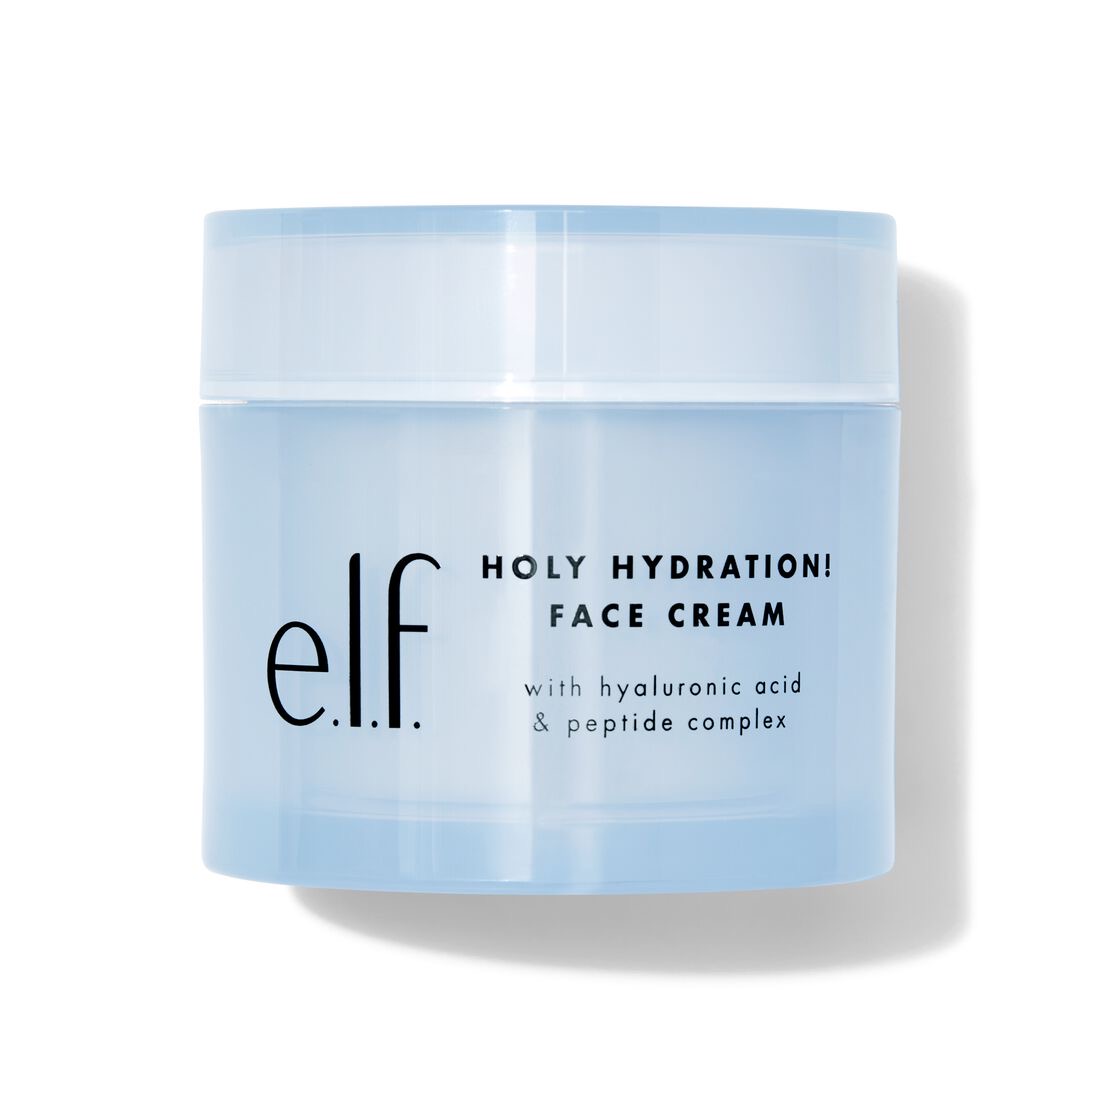 e.l.f. Holy Hydration! Face Cream - Ivy's Store